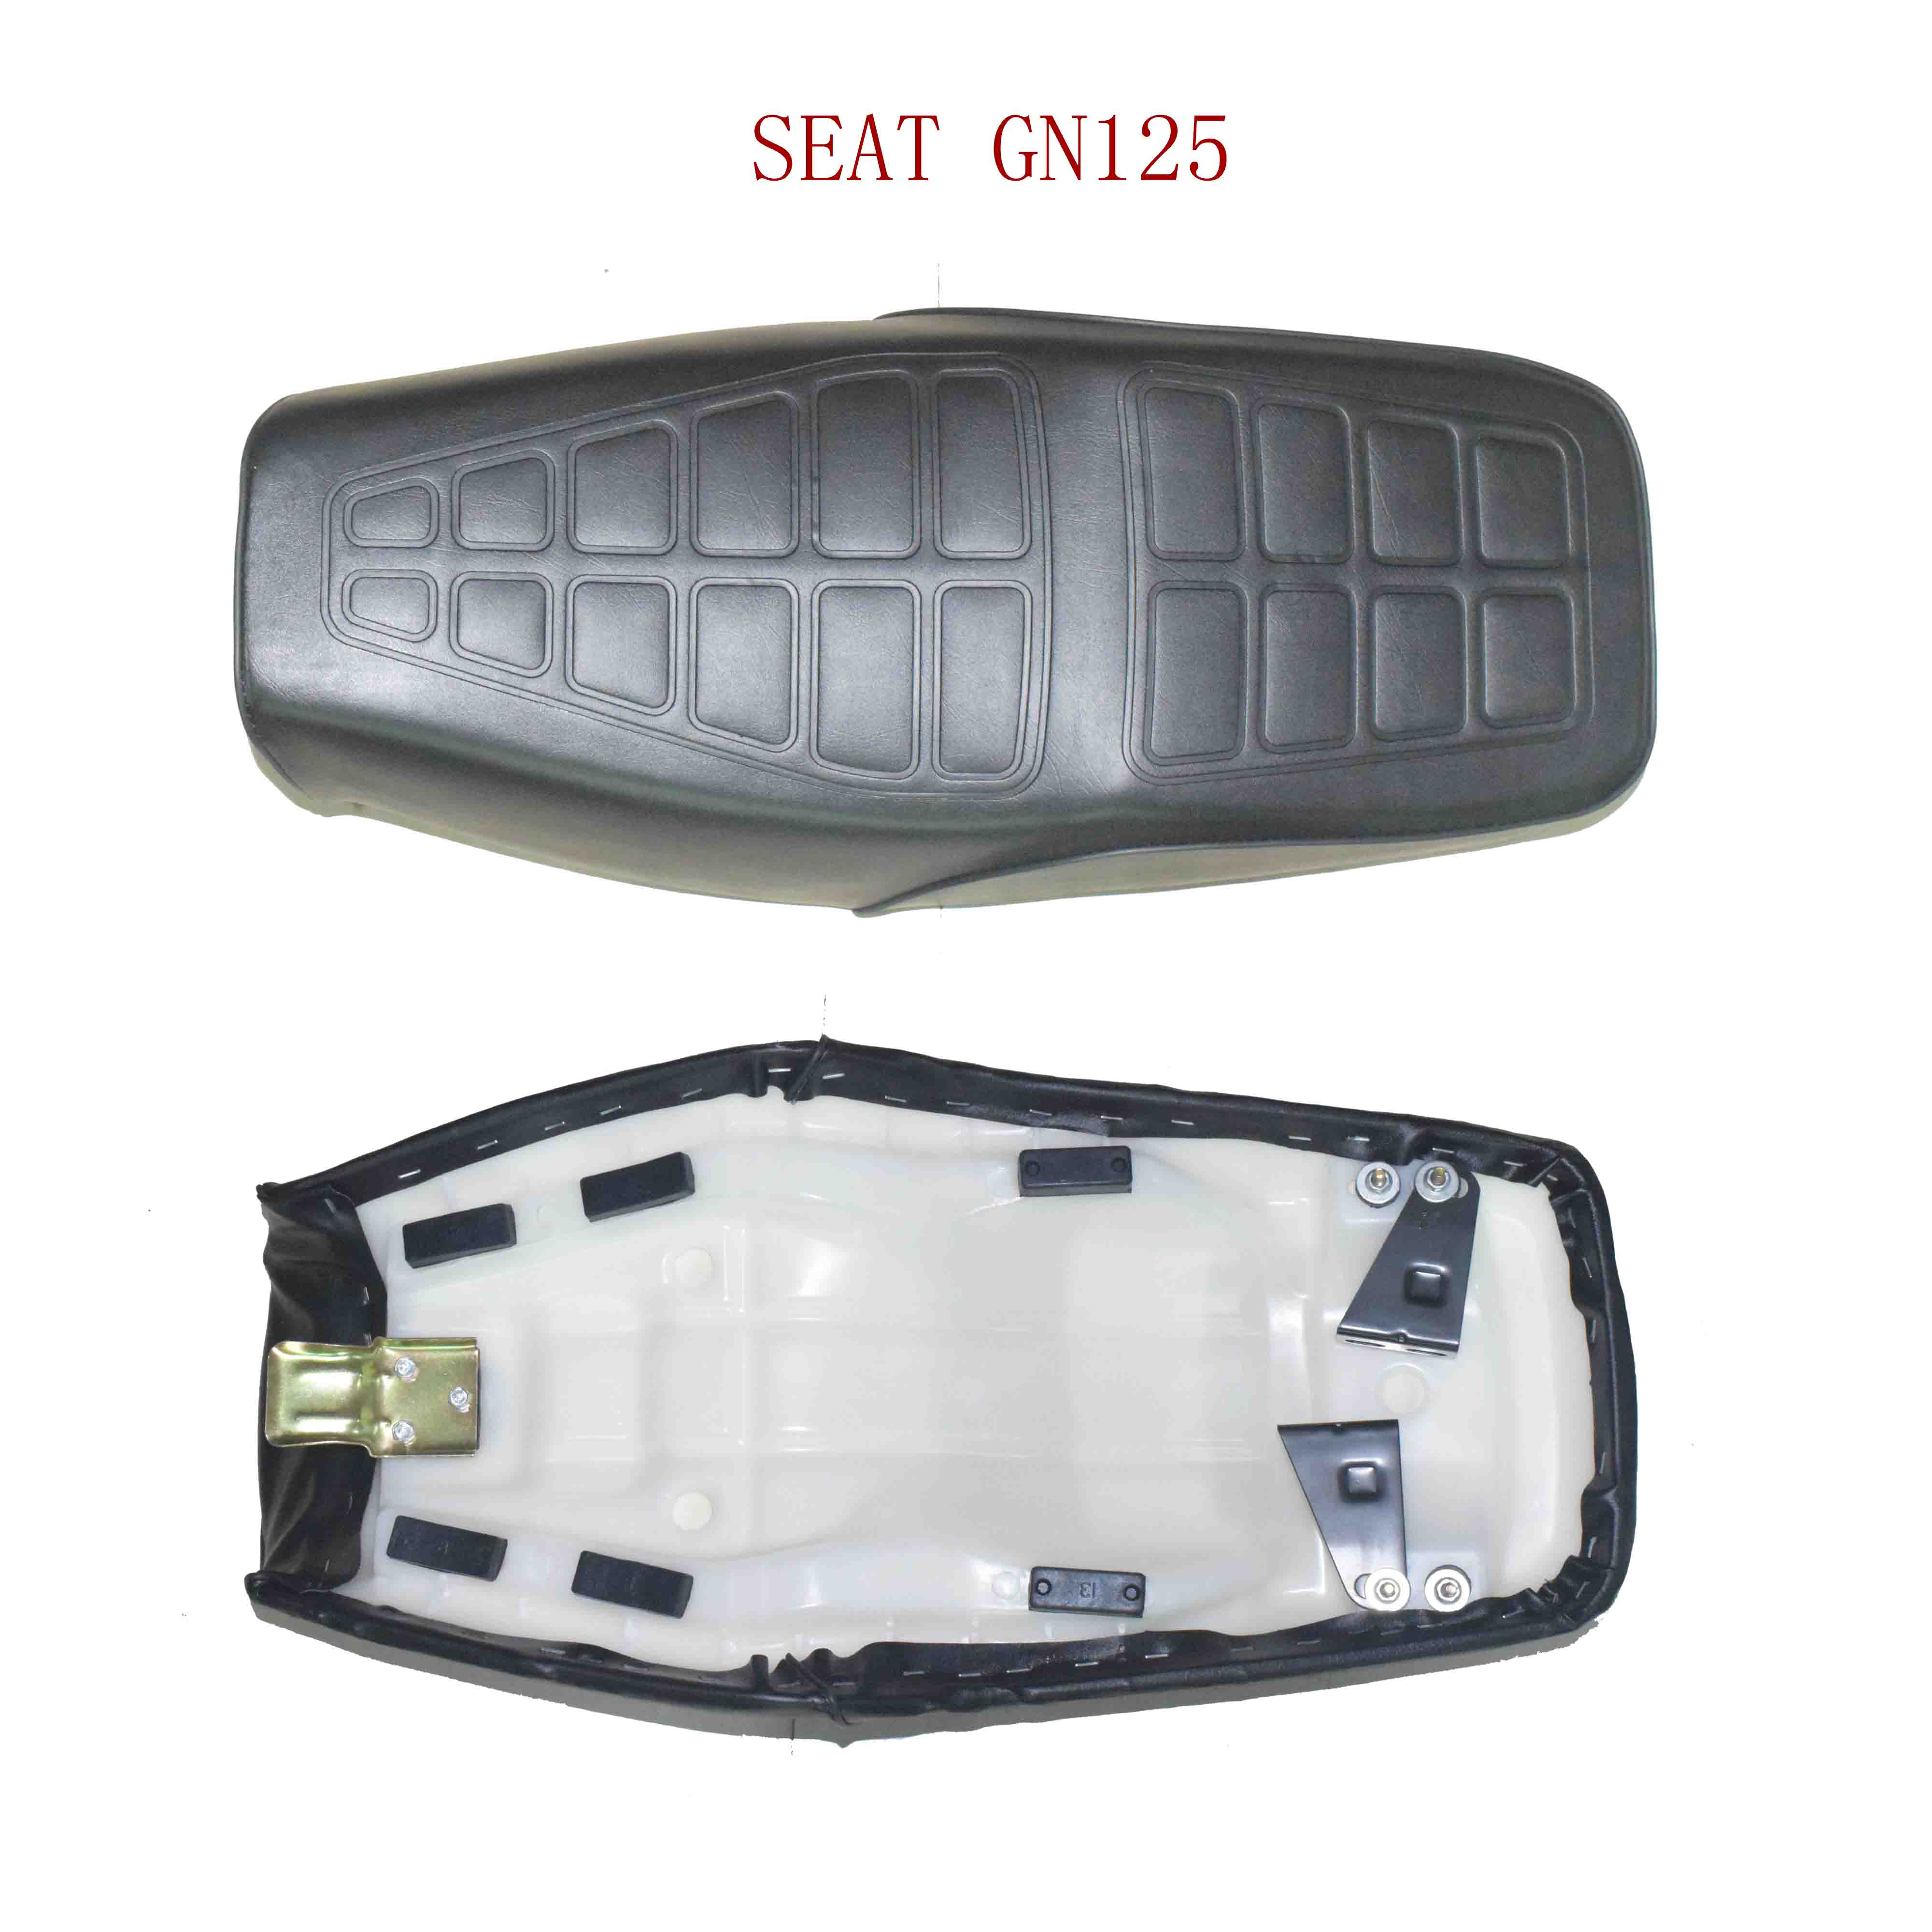 SEAT GN125 